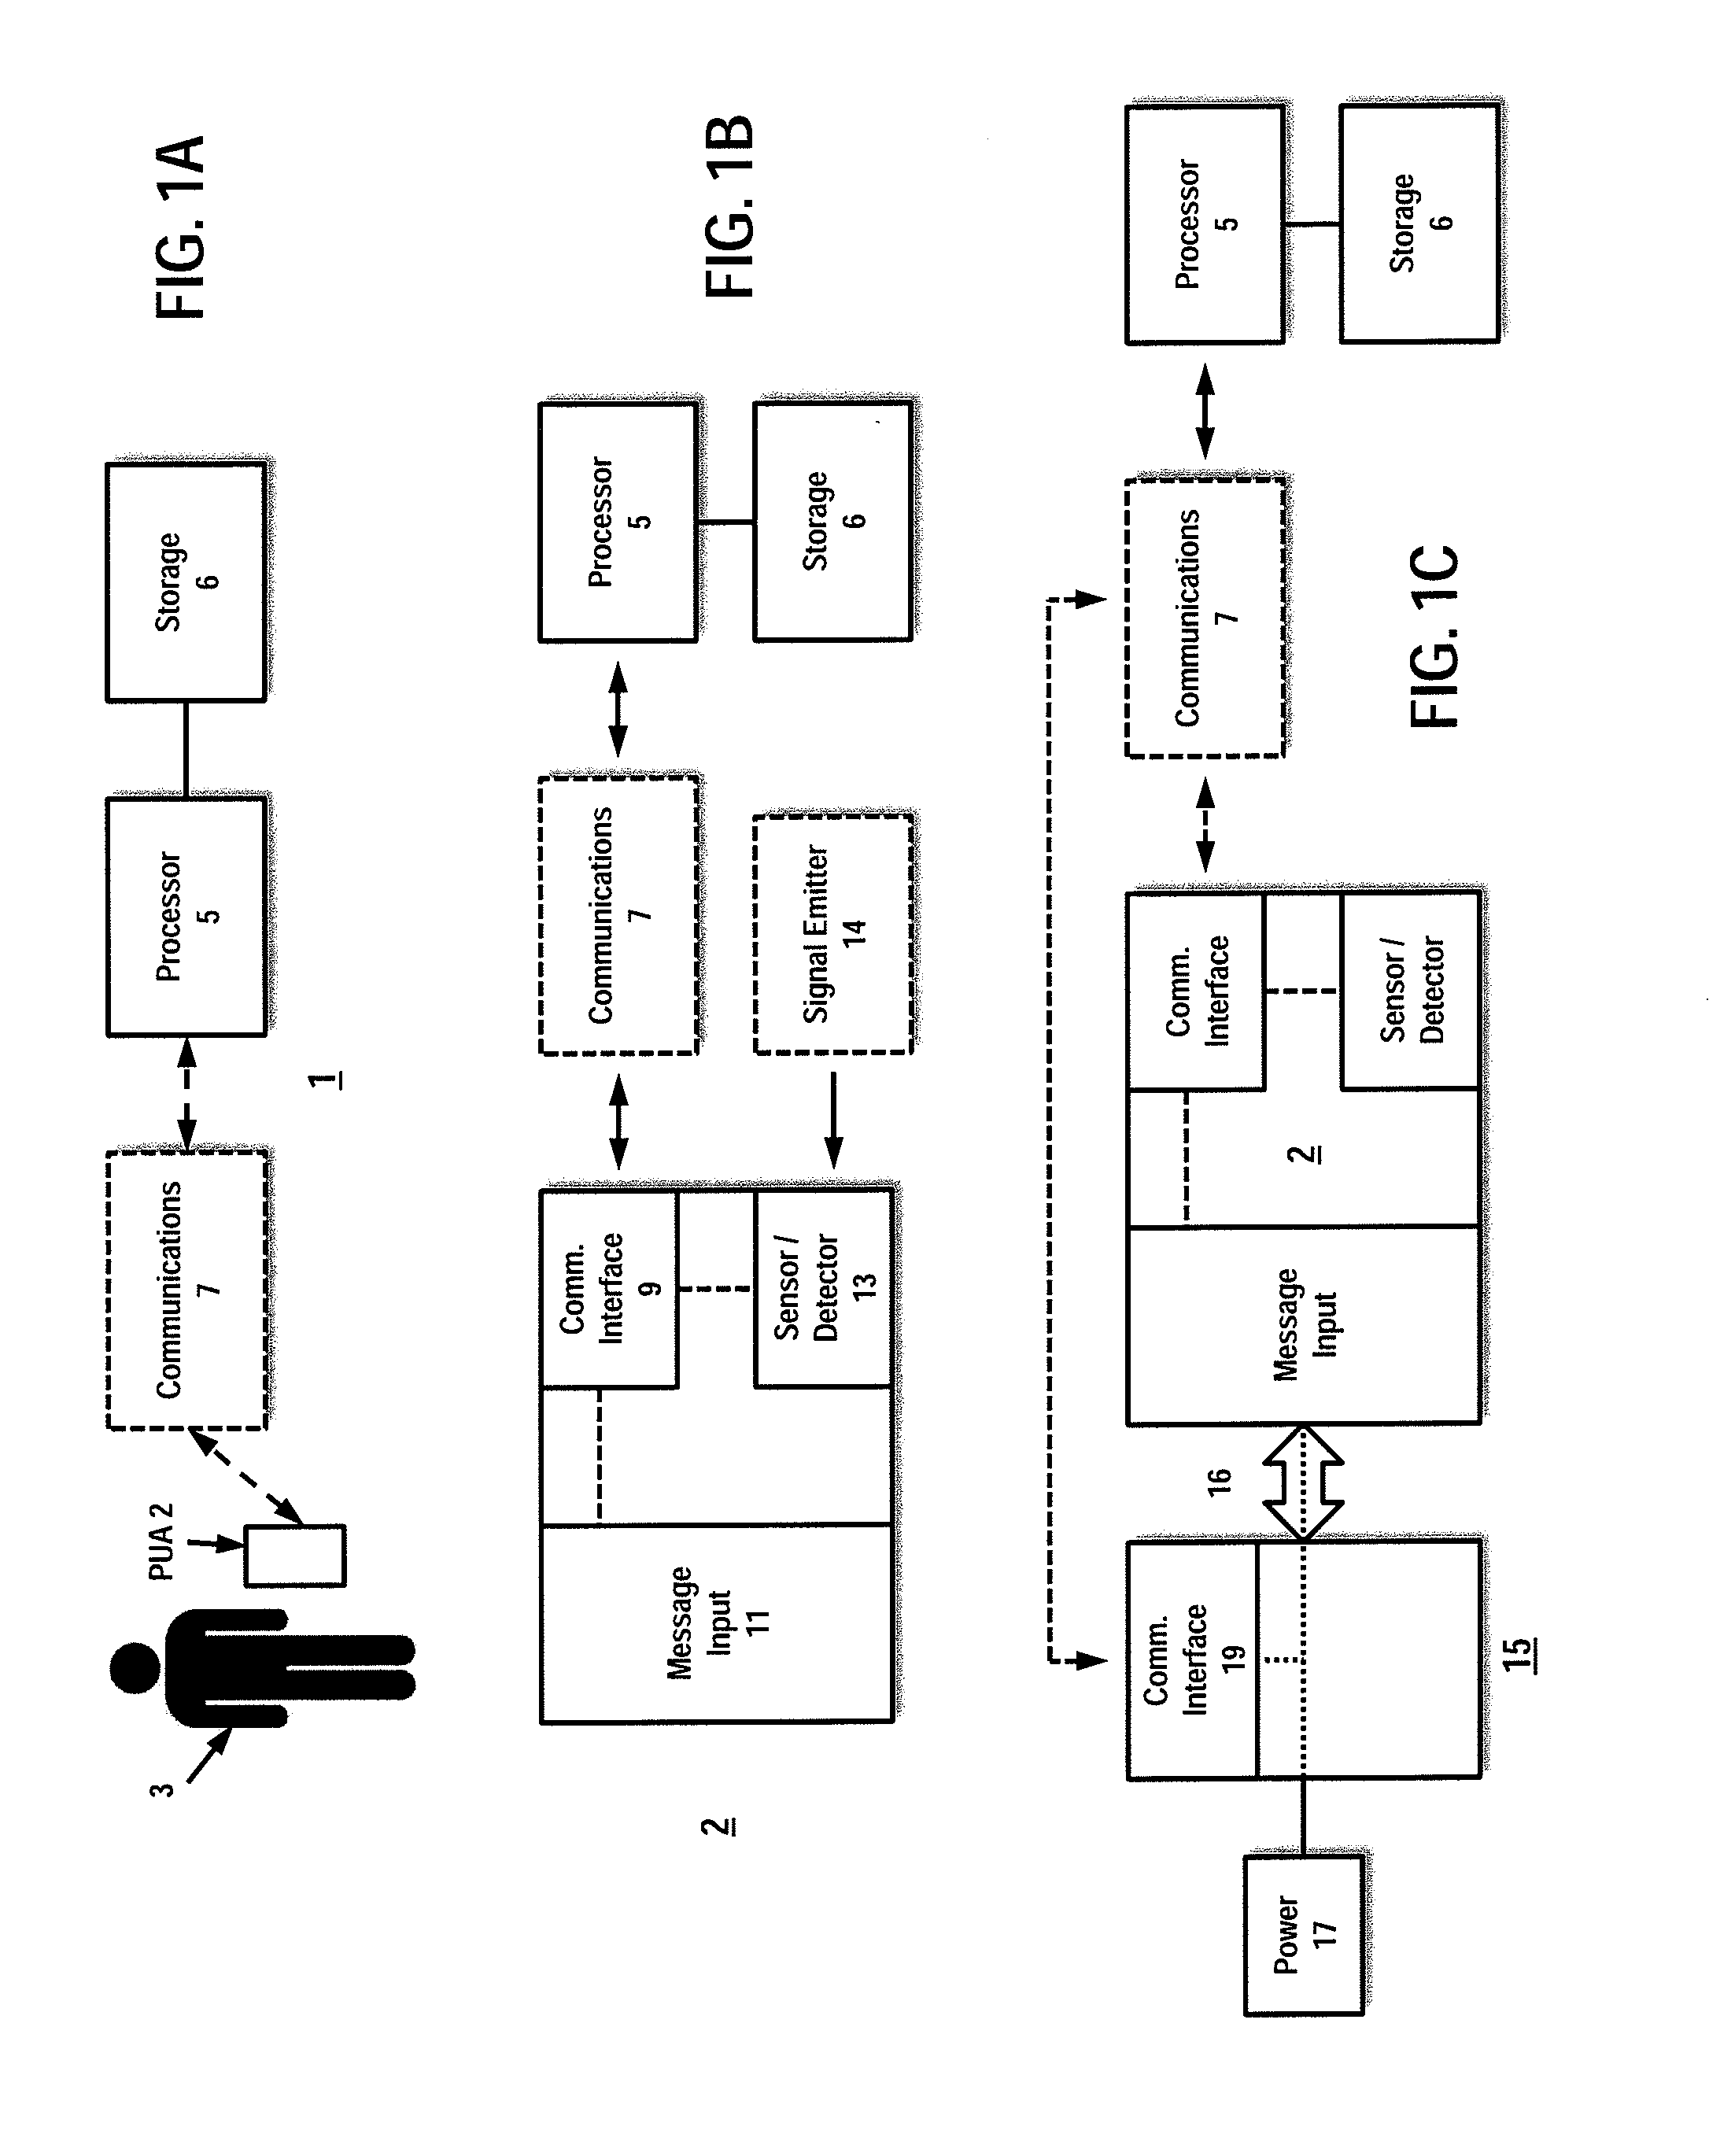 System and method for determining device compliance and recruitment